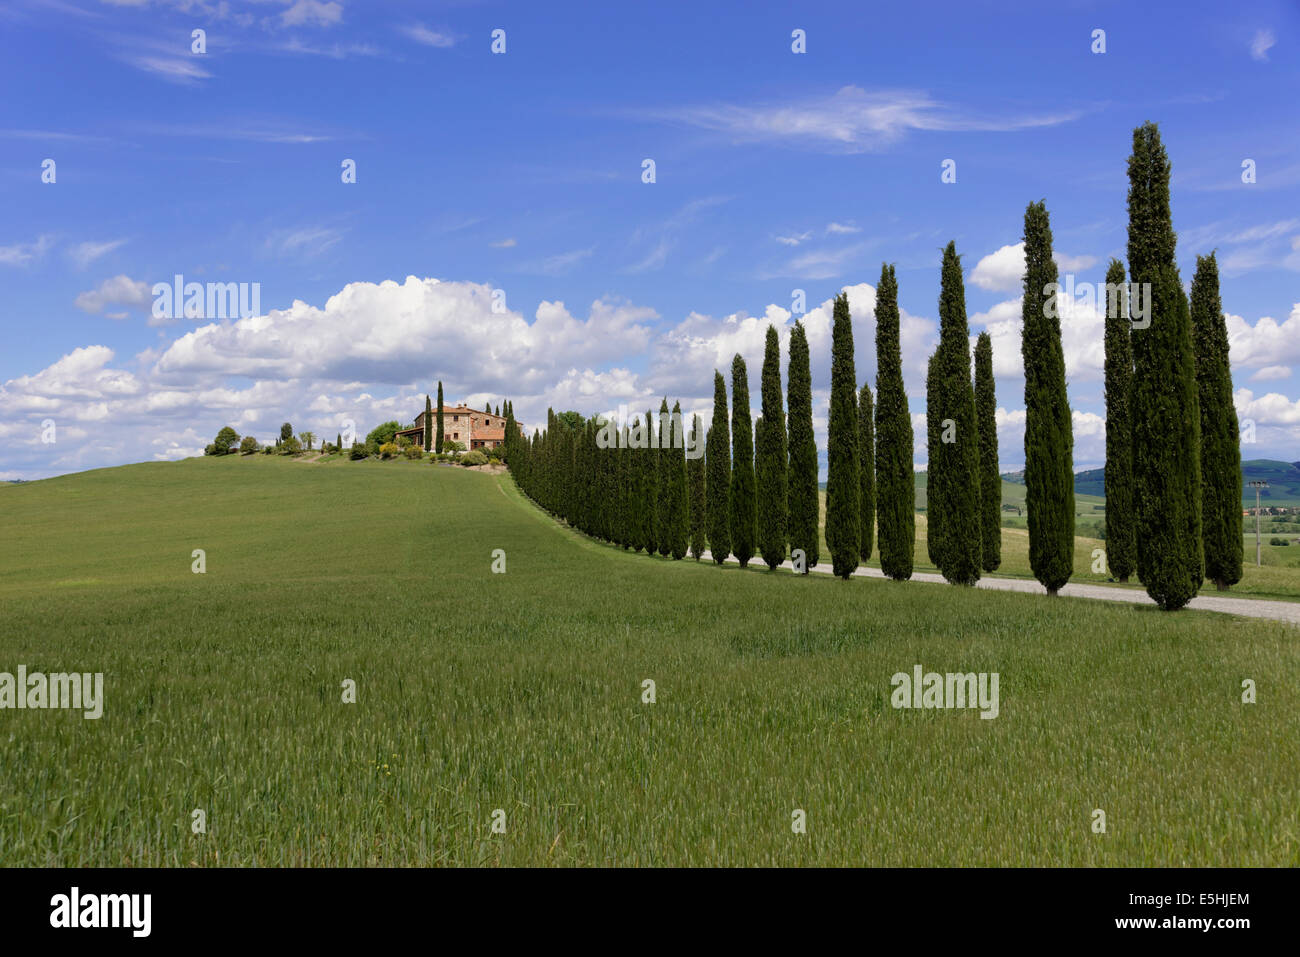 Cypress avenue to a country house, at Bagno Vignioni, San Quirico d'Orcia, Val d'Orcia, Province of Siena, Tuscany, Italy Stock Photo